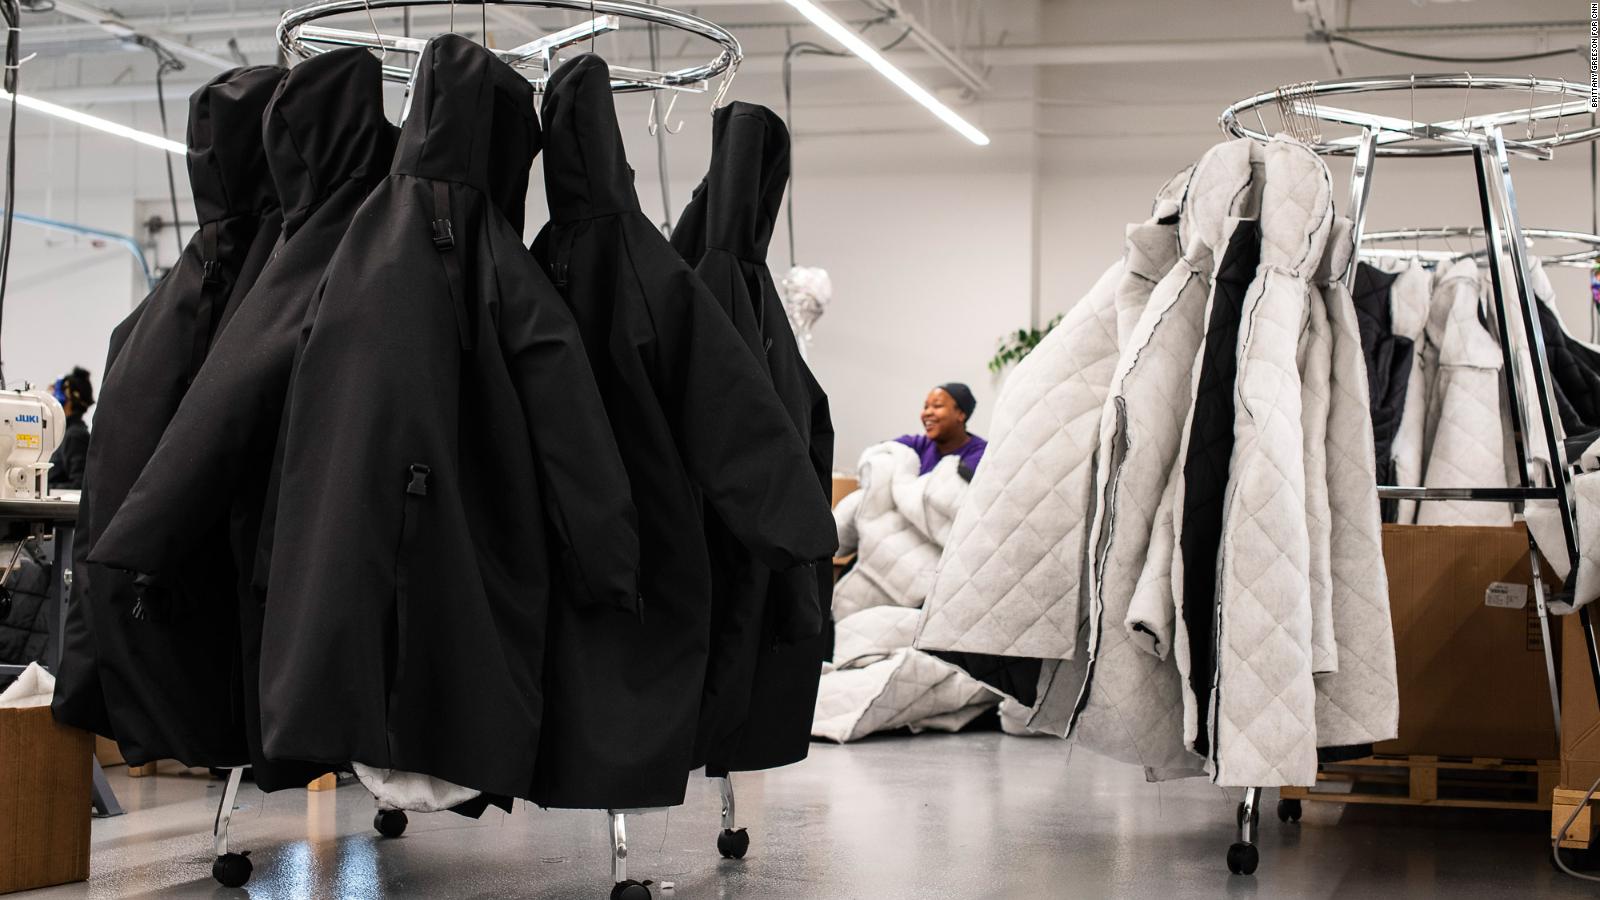 This coat design isn't just saving lives. It's launching new careers ...